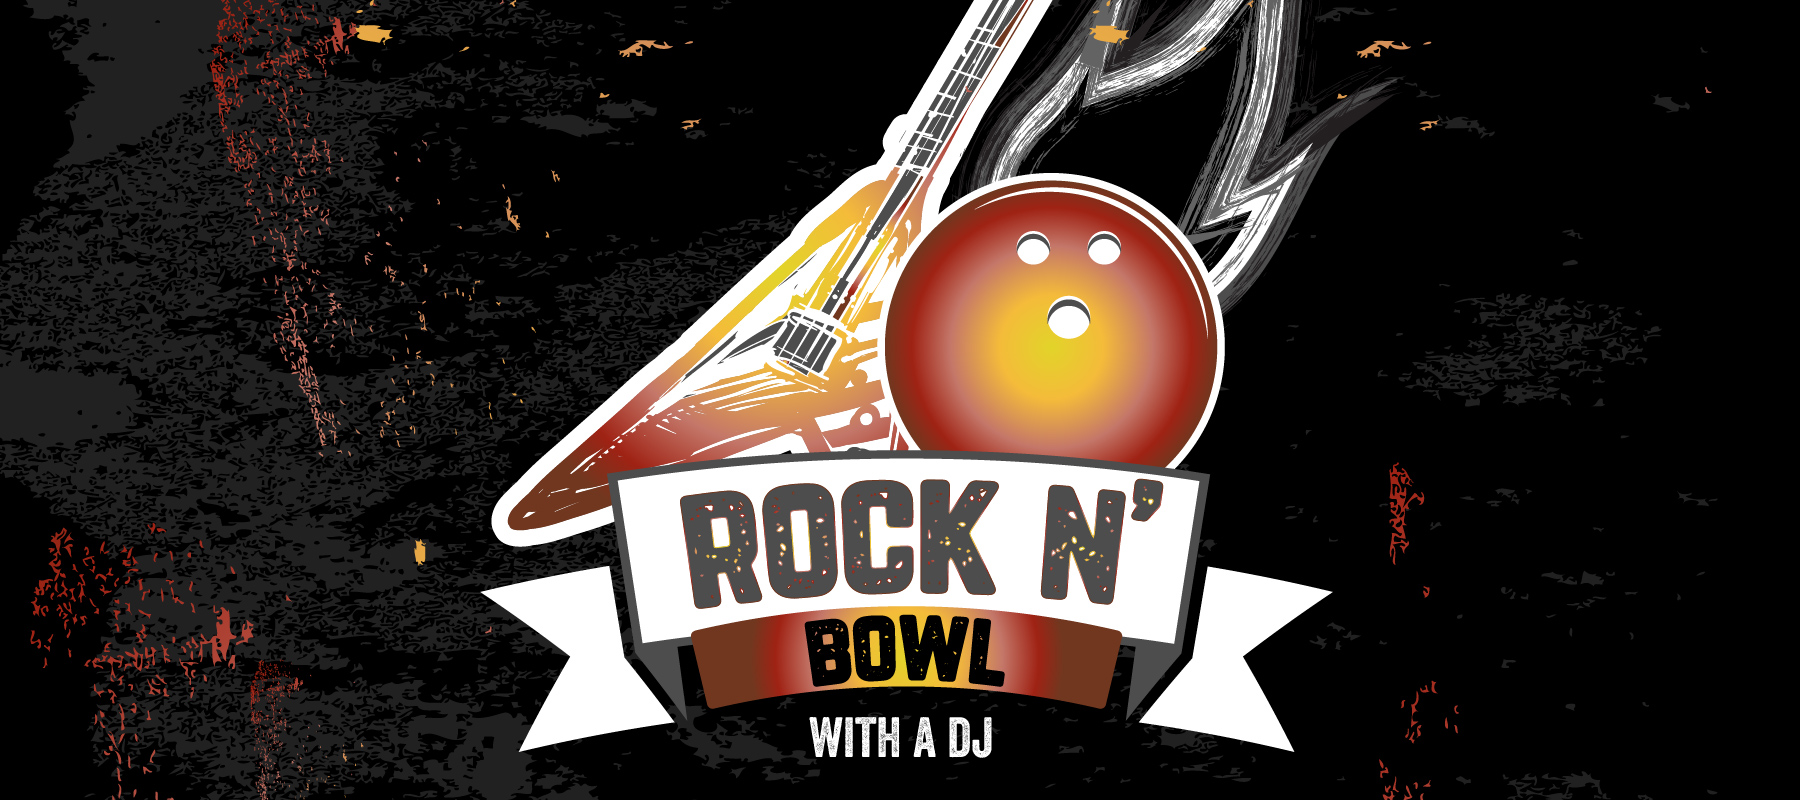 Rock n bowl with a dj; electric guitar and bowling ball